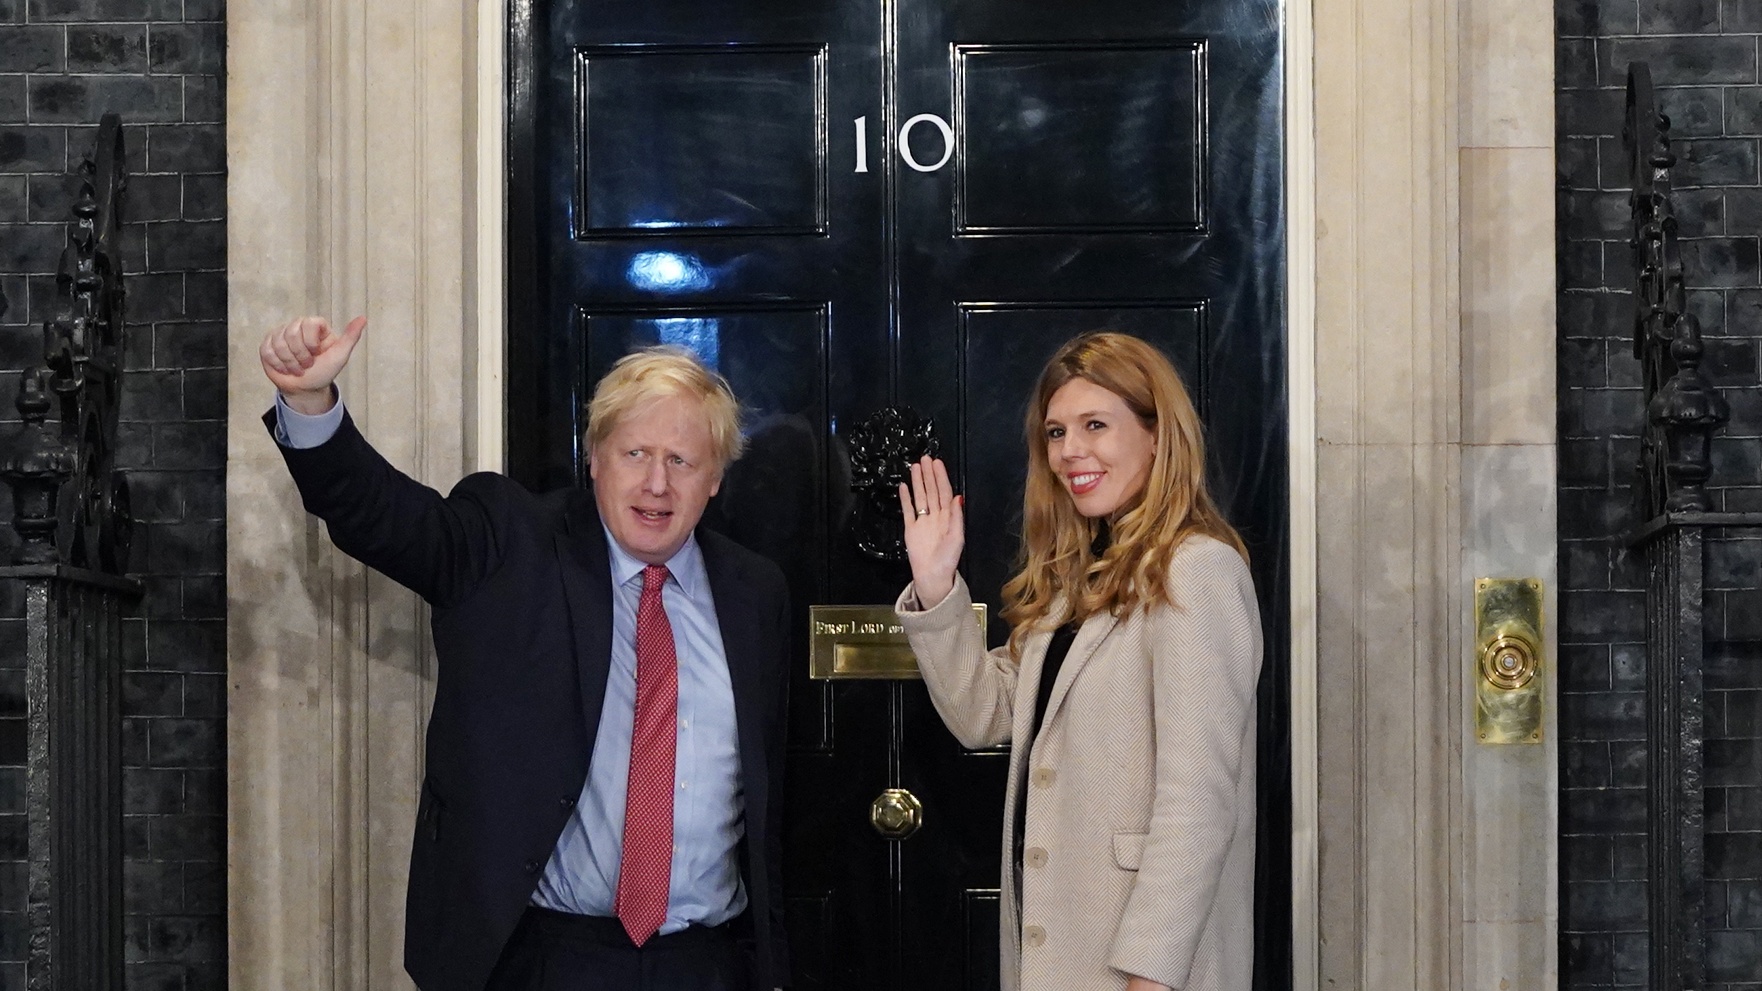 Boris Johnson and his fiancee Carrie Symonds in Downing Street